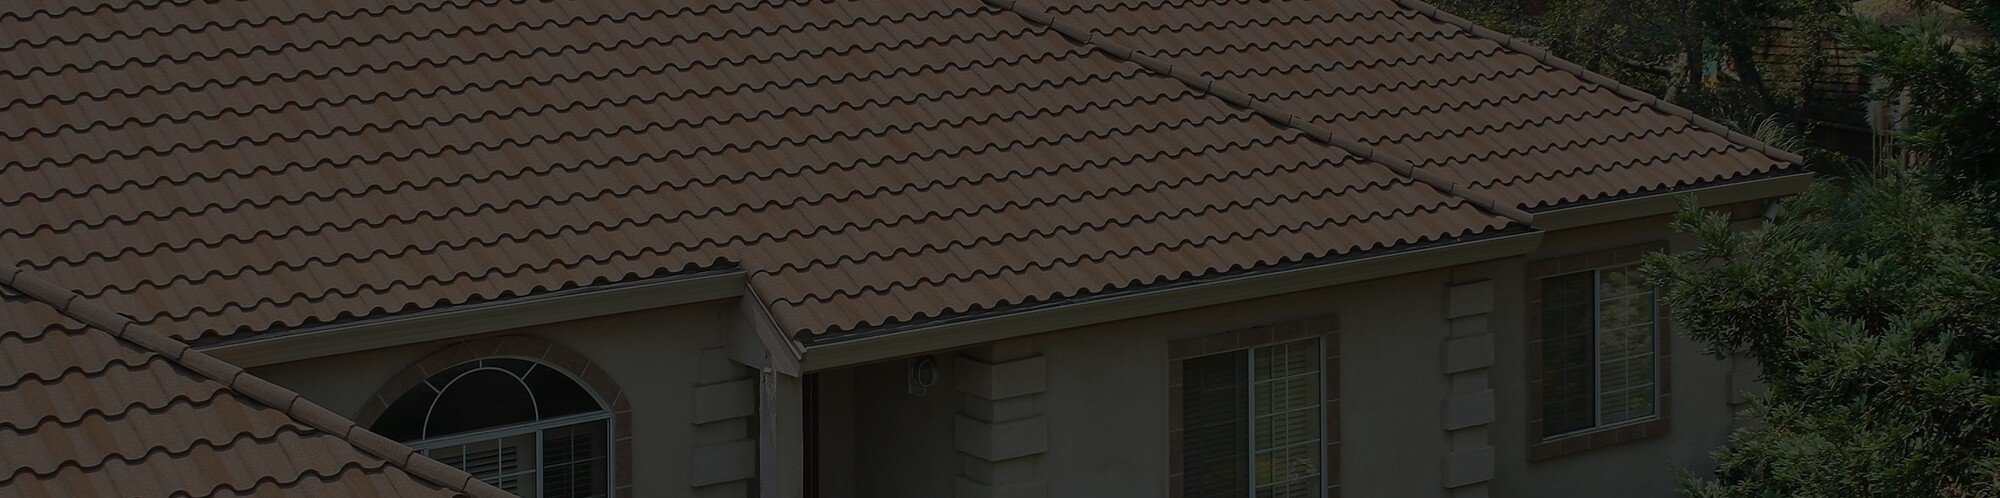 Stone coated metal roof installation, repair & replacement